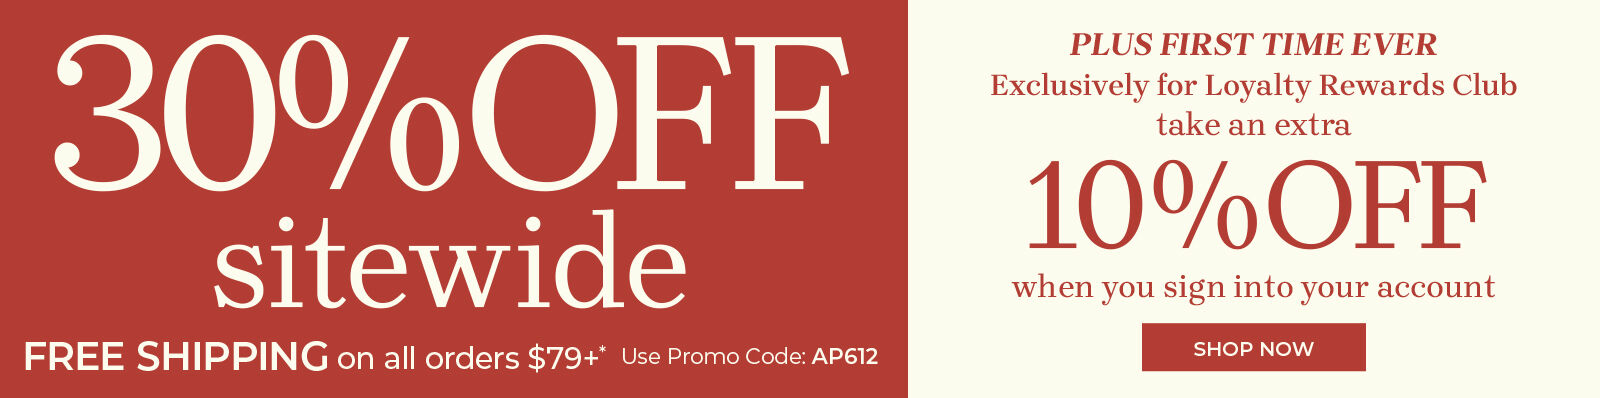 30% off sitewide free shipping on all orders $79+ Use promo code: AP612 plus, for the first time ever exclusively for loyalty rewards club take an extra 10% off when you sign into your account shop now